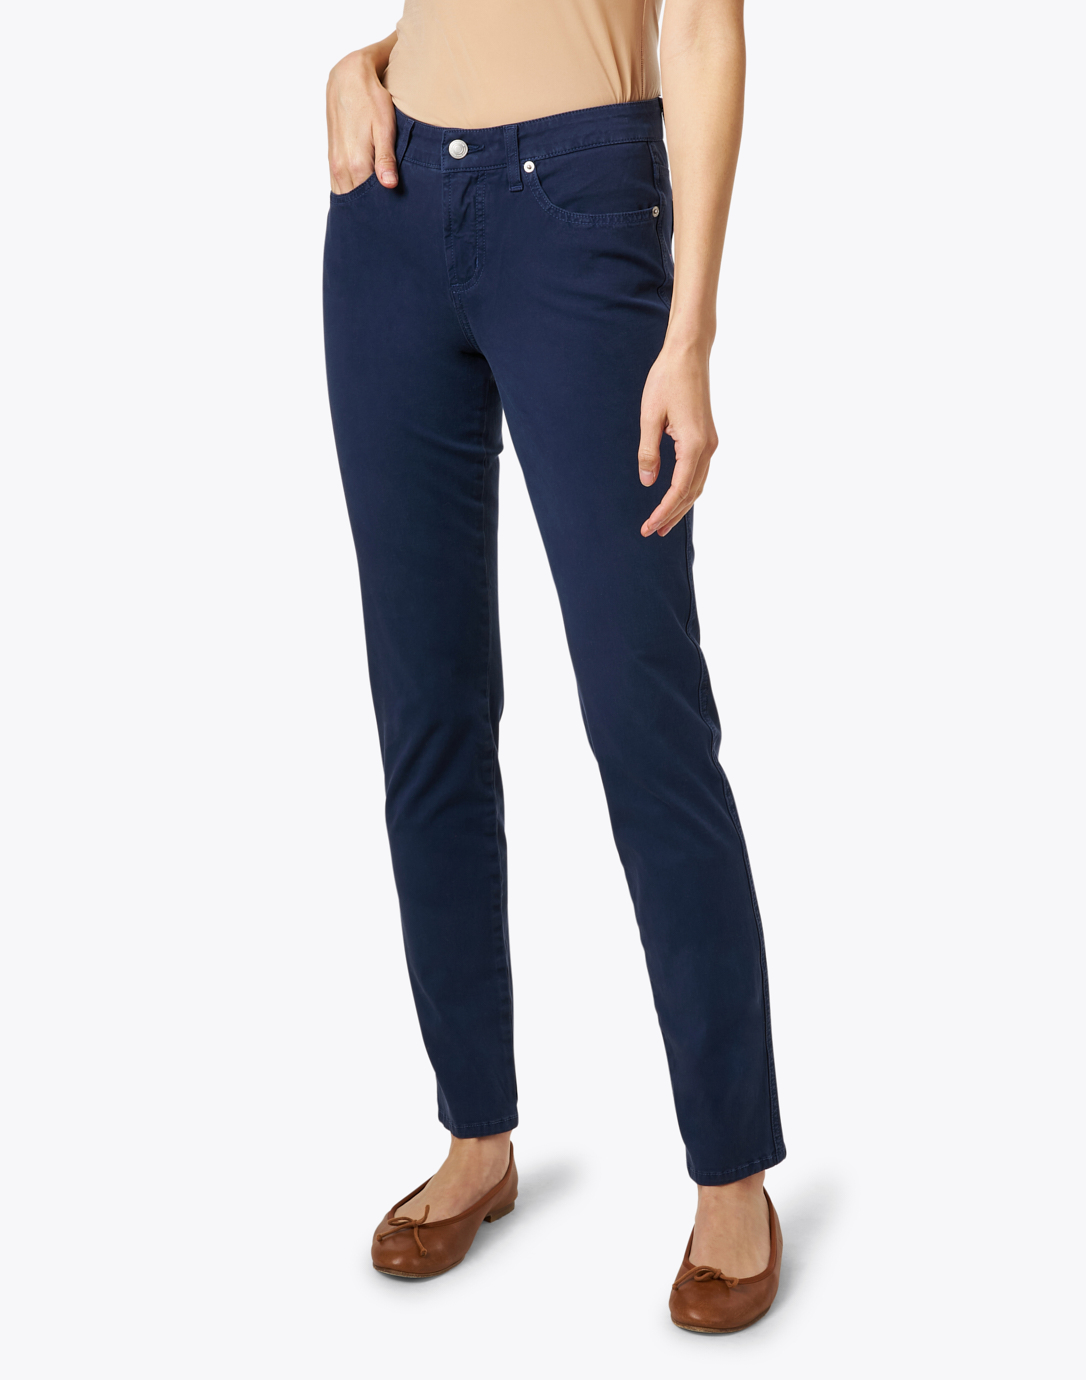 Piazza Italia Casual High Waist Jeans Pant For Women - Blue